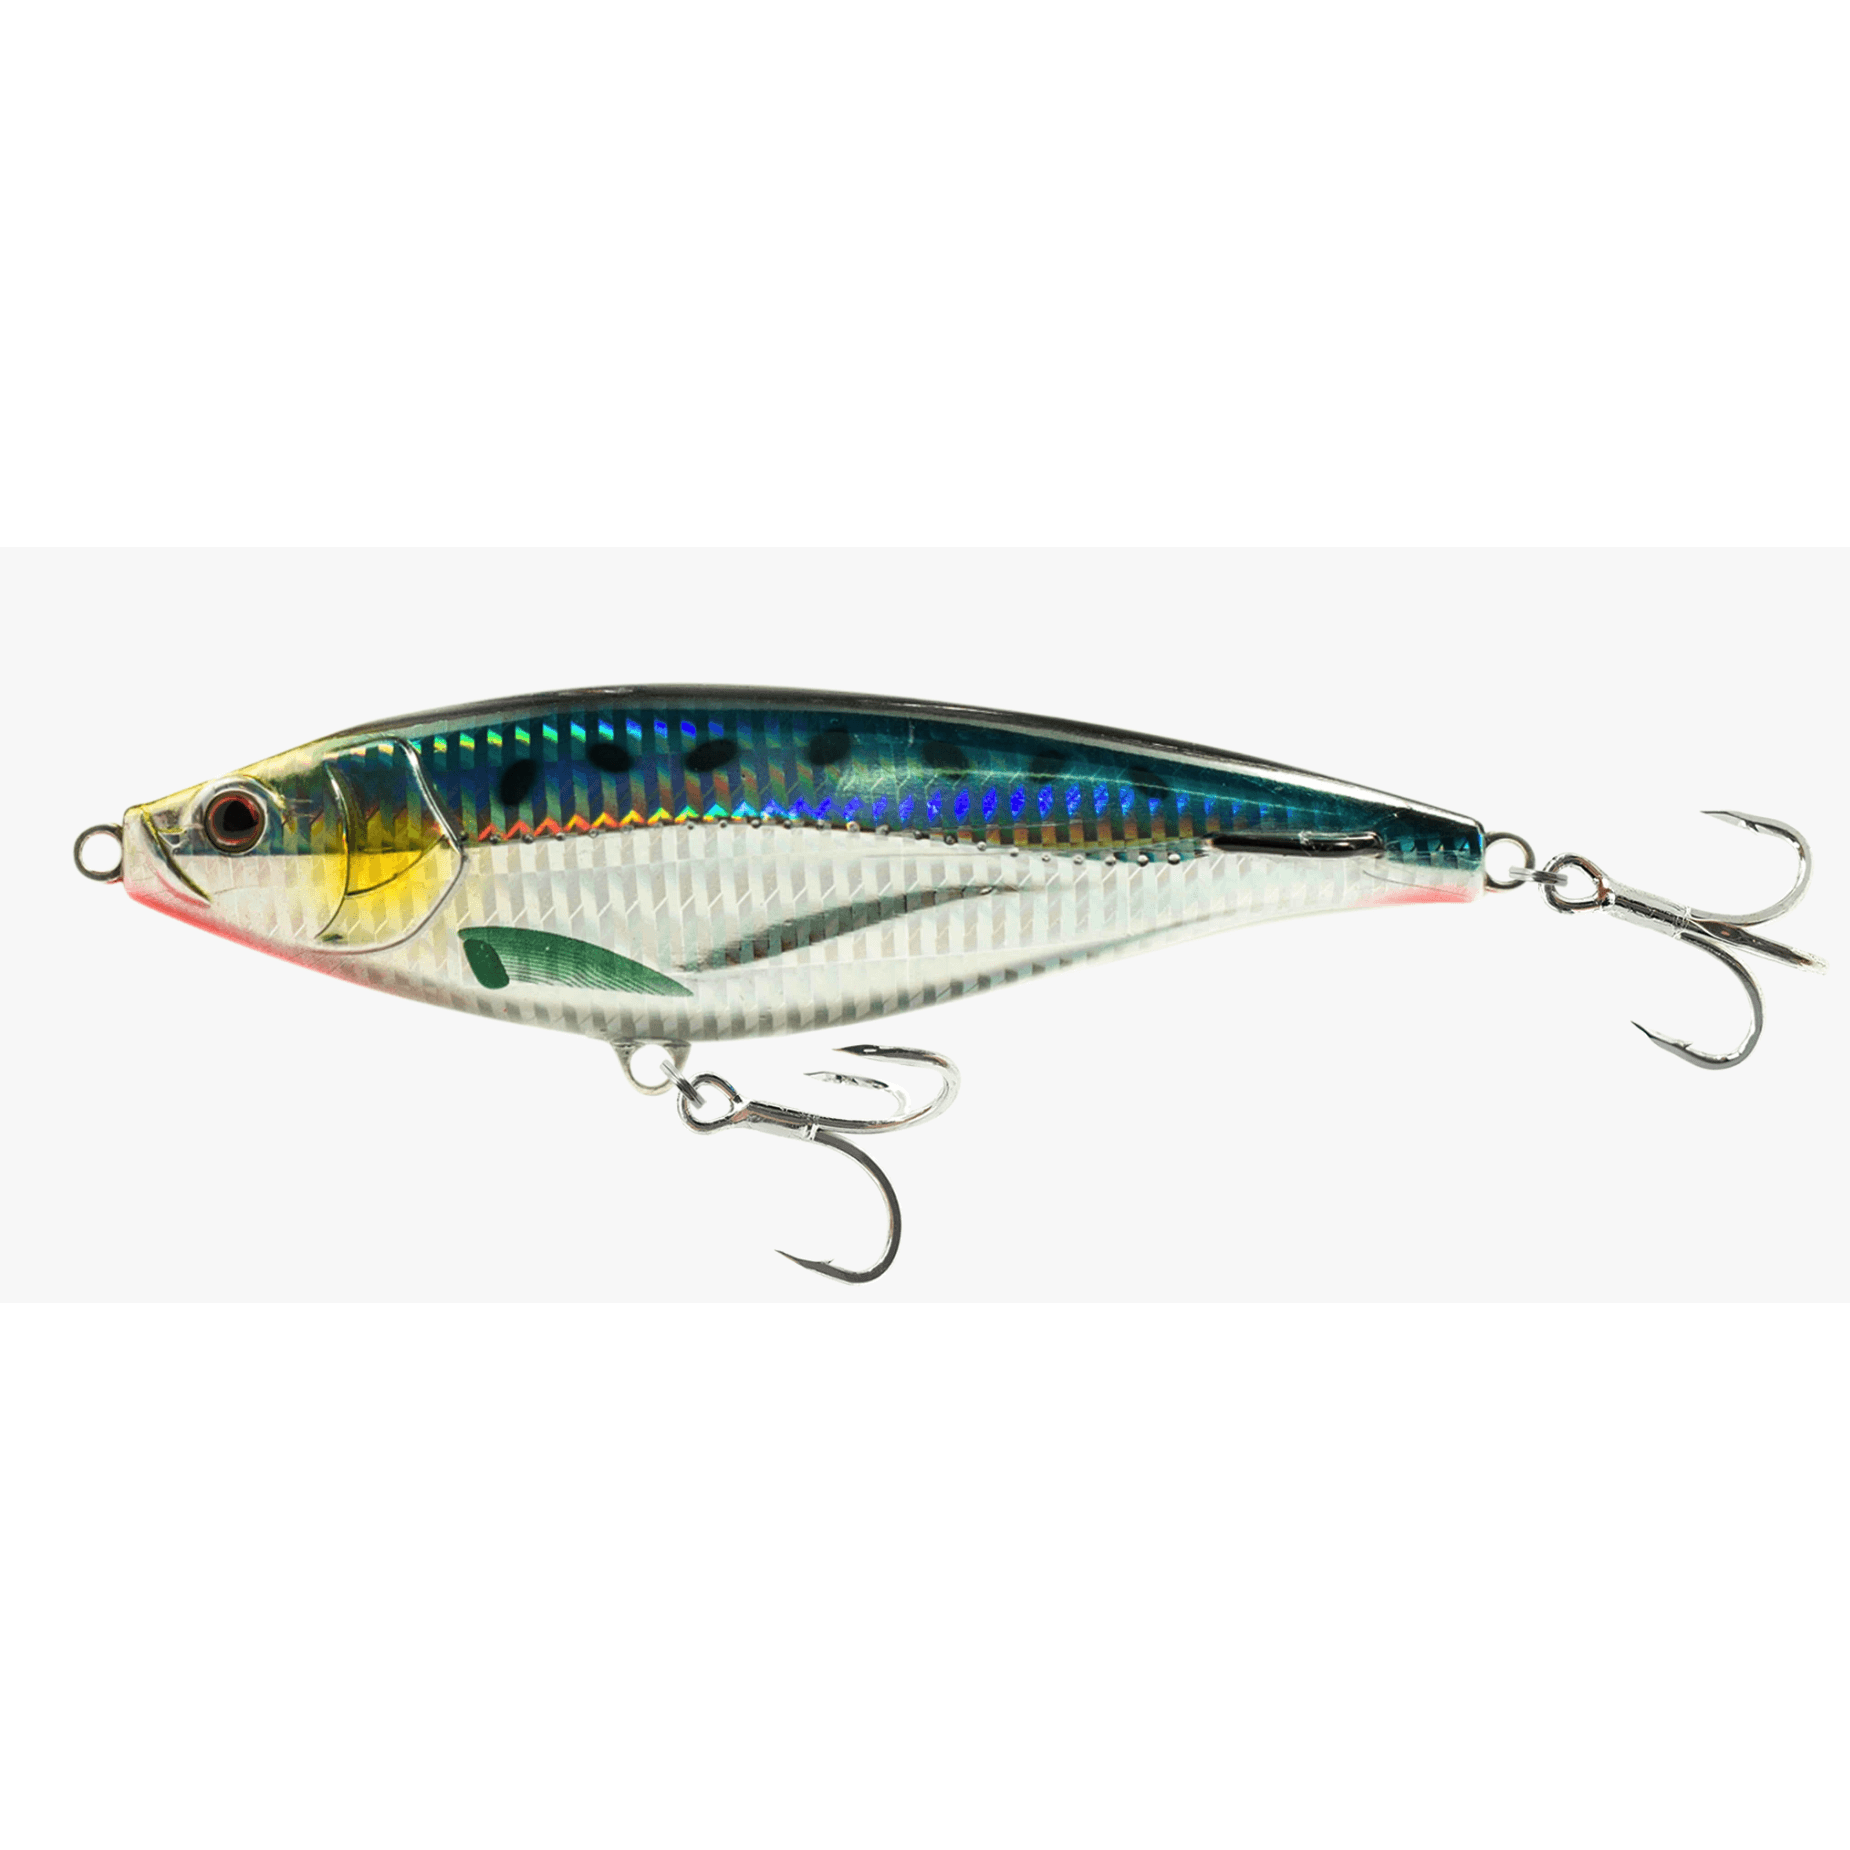 Nomad Madscad 190 AT Sinking Stickbait Fishing Lure 190mm